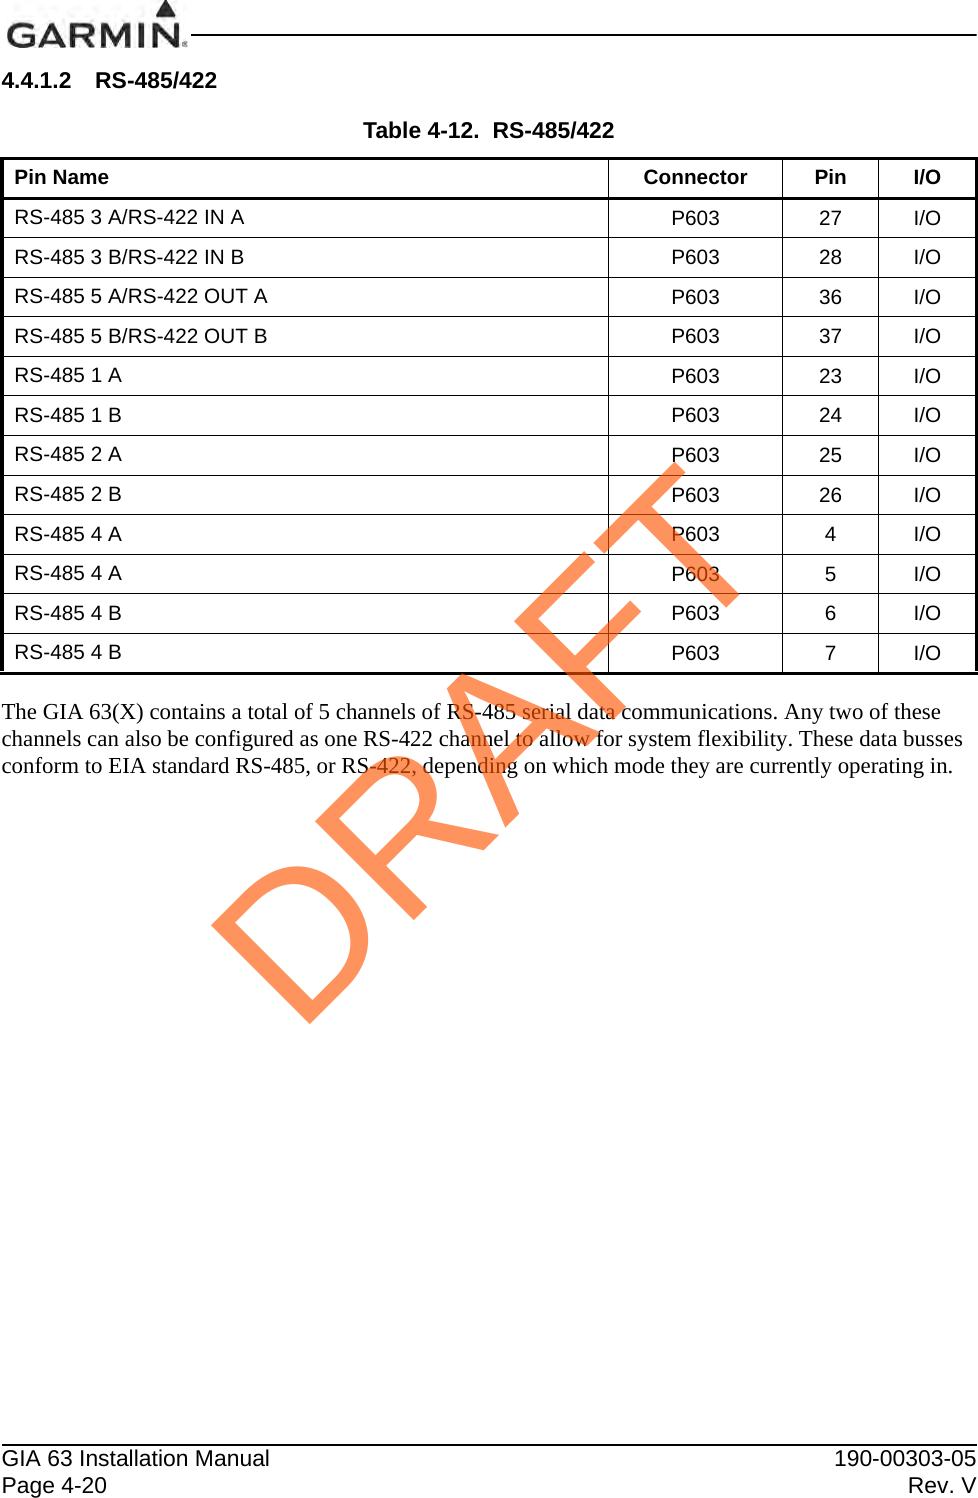 GIA 63 Installation Manual 190-00303-05Page 4-20 Rev. V4.4.1.2 RS-485/422The GIA 63(X) contains a total of 5 channels of RS-485 serial data communications. Any two of these channels can also be configured as one RS-422 channel to allow for system flexibility. These data busses conform to EIA standard RS-485, or RS-422, depending on which mode they are currently operating in.Table 4-12.  RS-485/422Pin Name Connector Pin I/ORS-485 3 A/RS-422 IN A P603 27 I/ORS-485 3 B/RS-422 IN B P603 28 I/ORS-485 5 A/RS-422 OUT A P603 36 I/ORS-485 5 B/RS-422 OUT B P603 37 I/ORS-485 1 A P603 23 I/ORS-485 1 B P603 24 I/ORS-485 2 A P603 25 I/ORS-485 2 B P603 26 I/ORS-485 4 A P603 4I/ORS-485 4 A P603 5I/ORS-485 4 B P603 6I/ORS-485 4 B P603 7I/ODRAFT